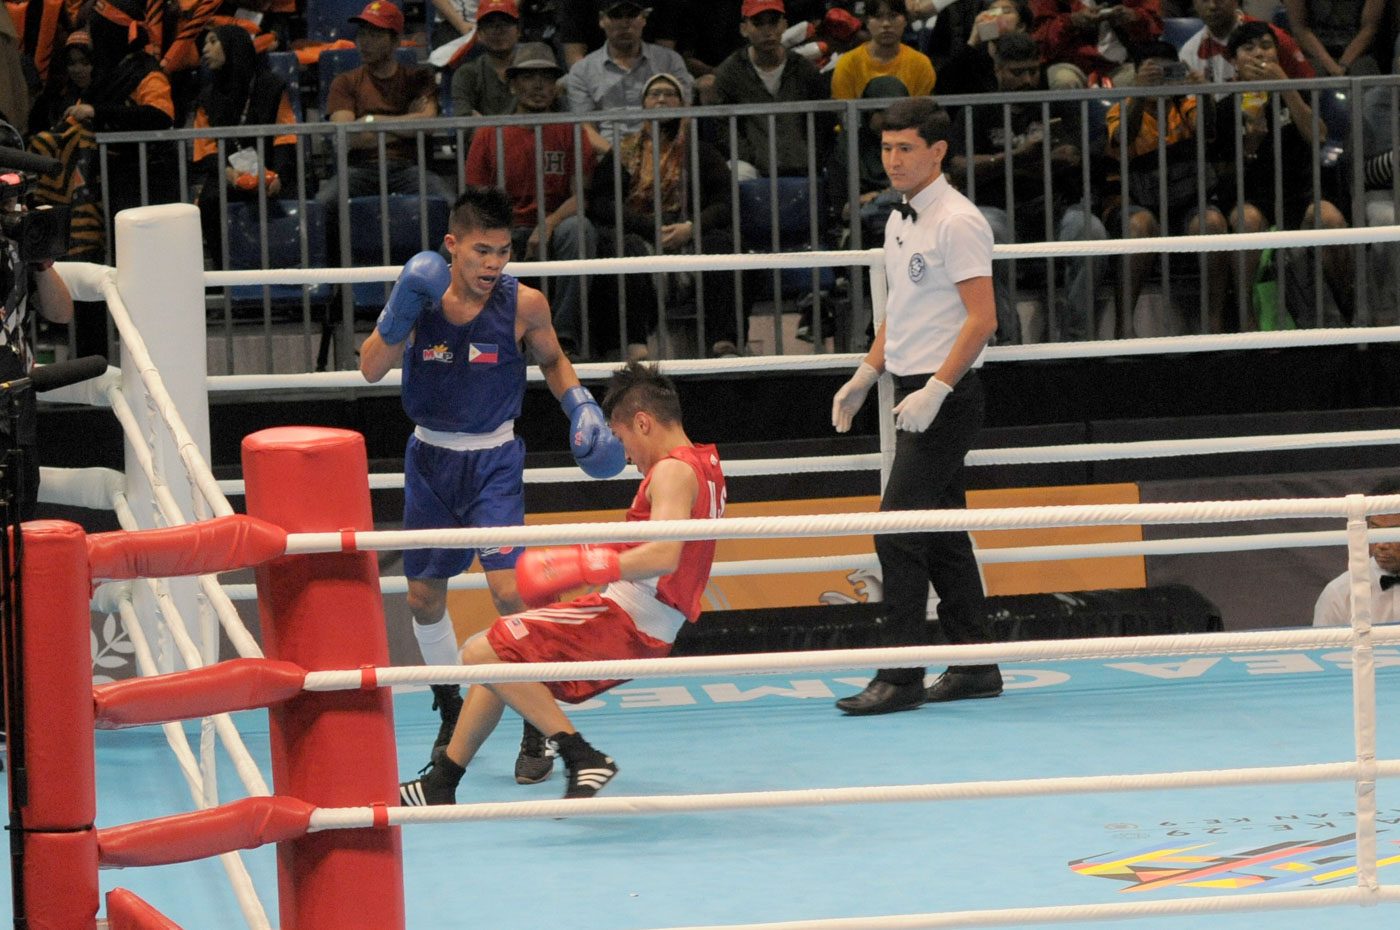 PH boxer Paalam ousted by Malaysian in dubious decision at 2017 SEA Games